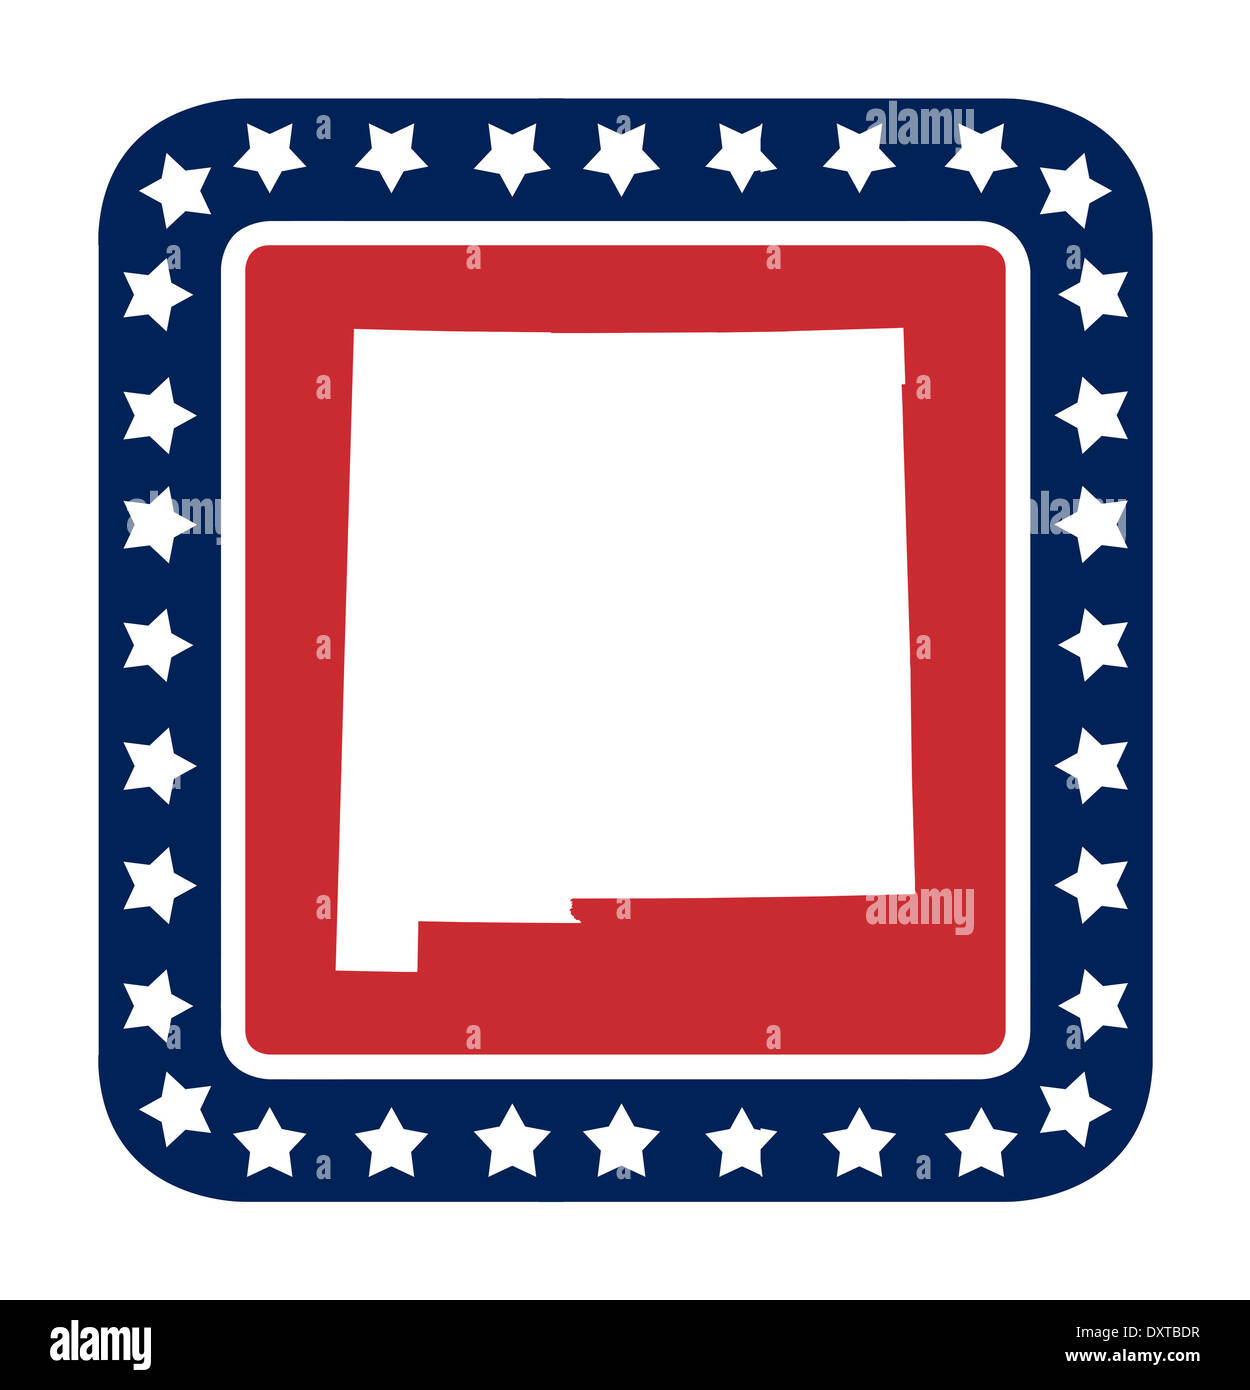 New Mexico state button on American flag in flat web design style, isolated on white background. Stock Photo